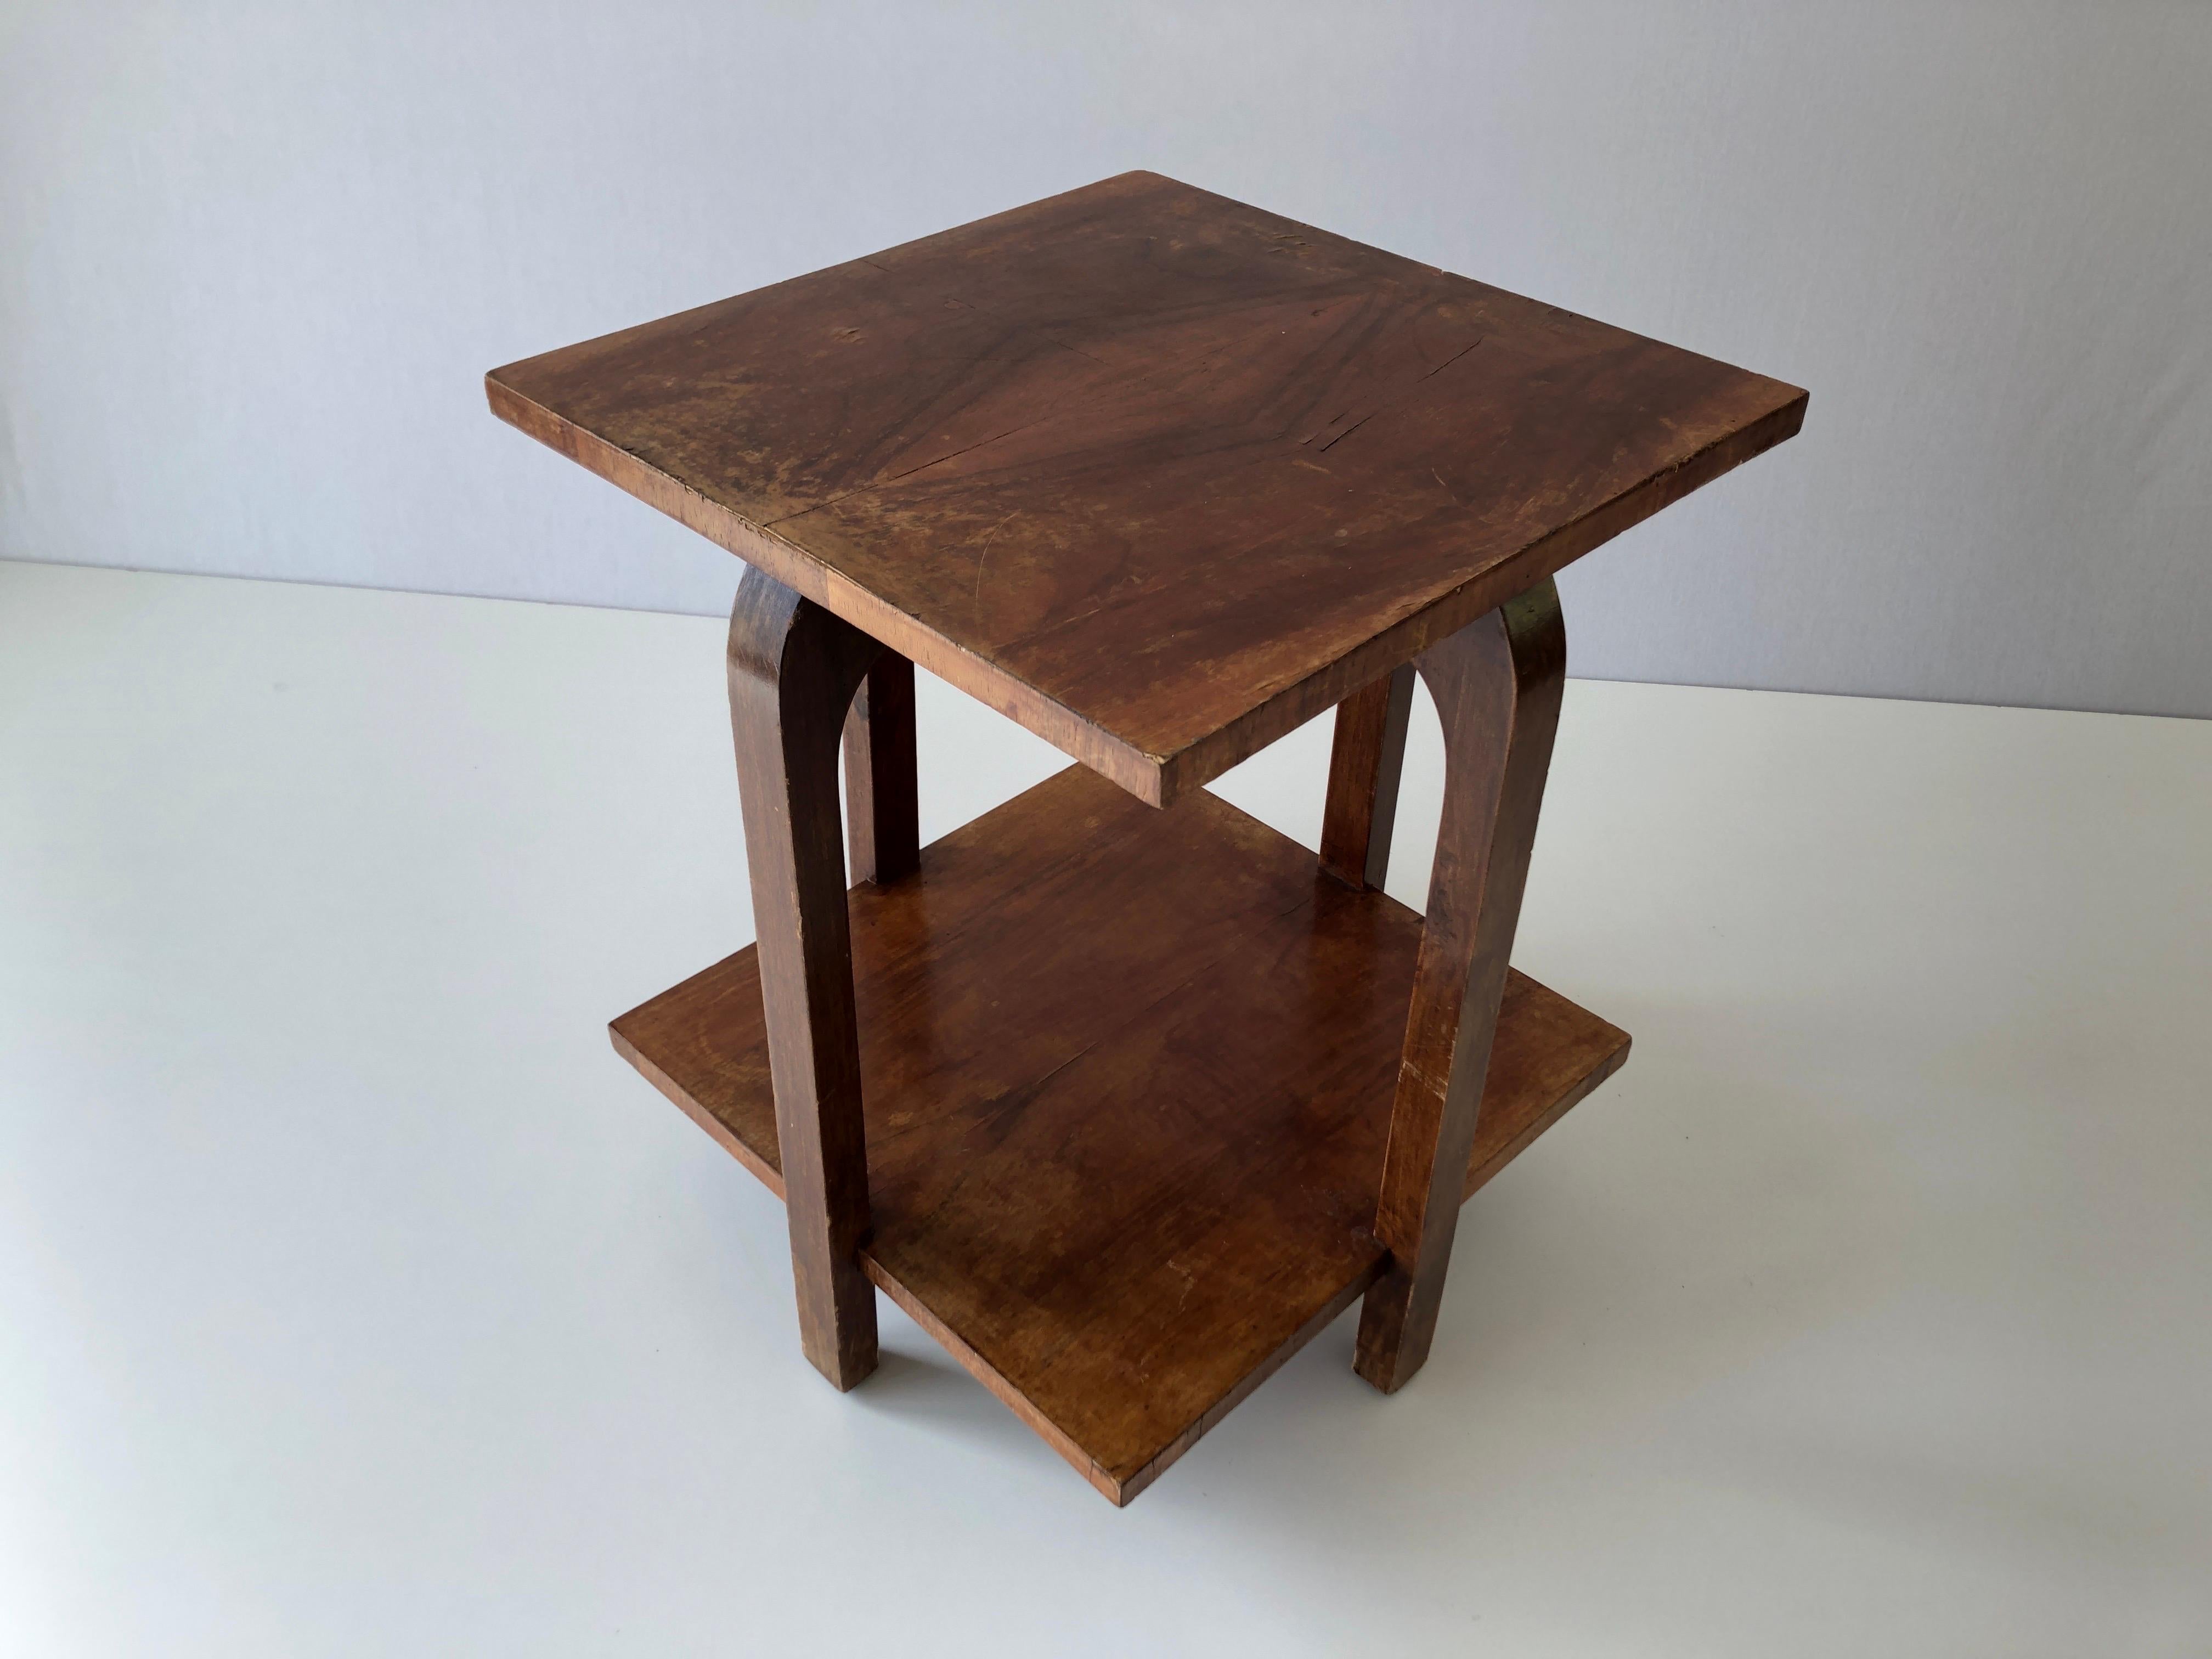 Art Deco Square Wood Corner or End Table, 1940s, Made in Italy

Measurtements :

50 cm x 50 cm
Height: 62 cm

Please do not hesitate to ask us if you have any questions.